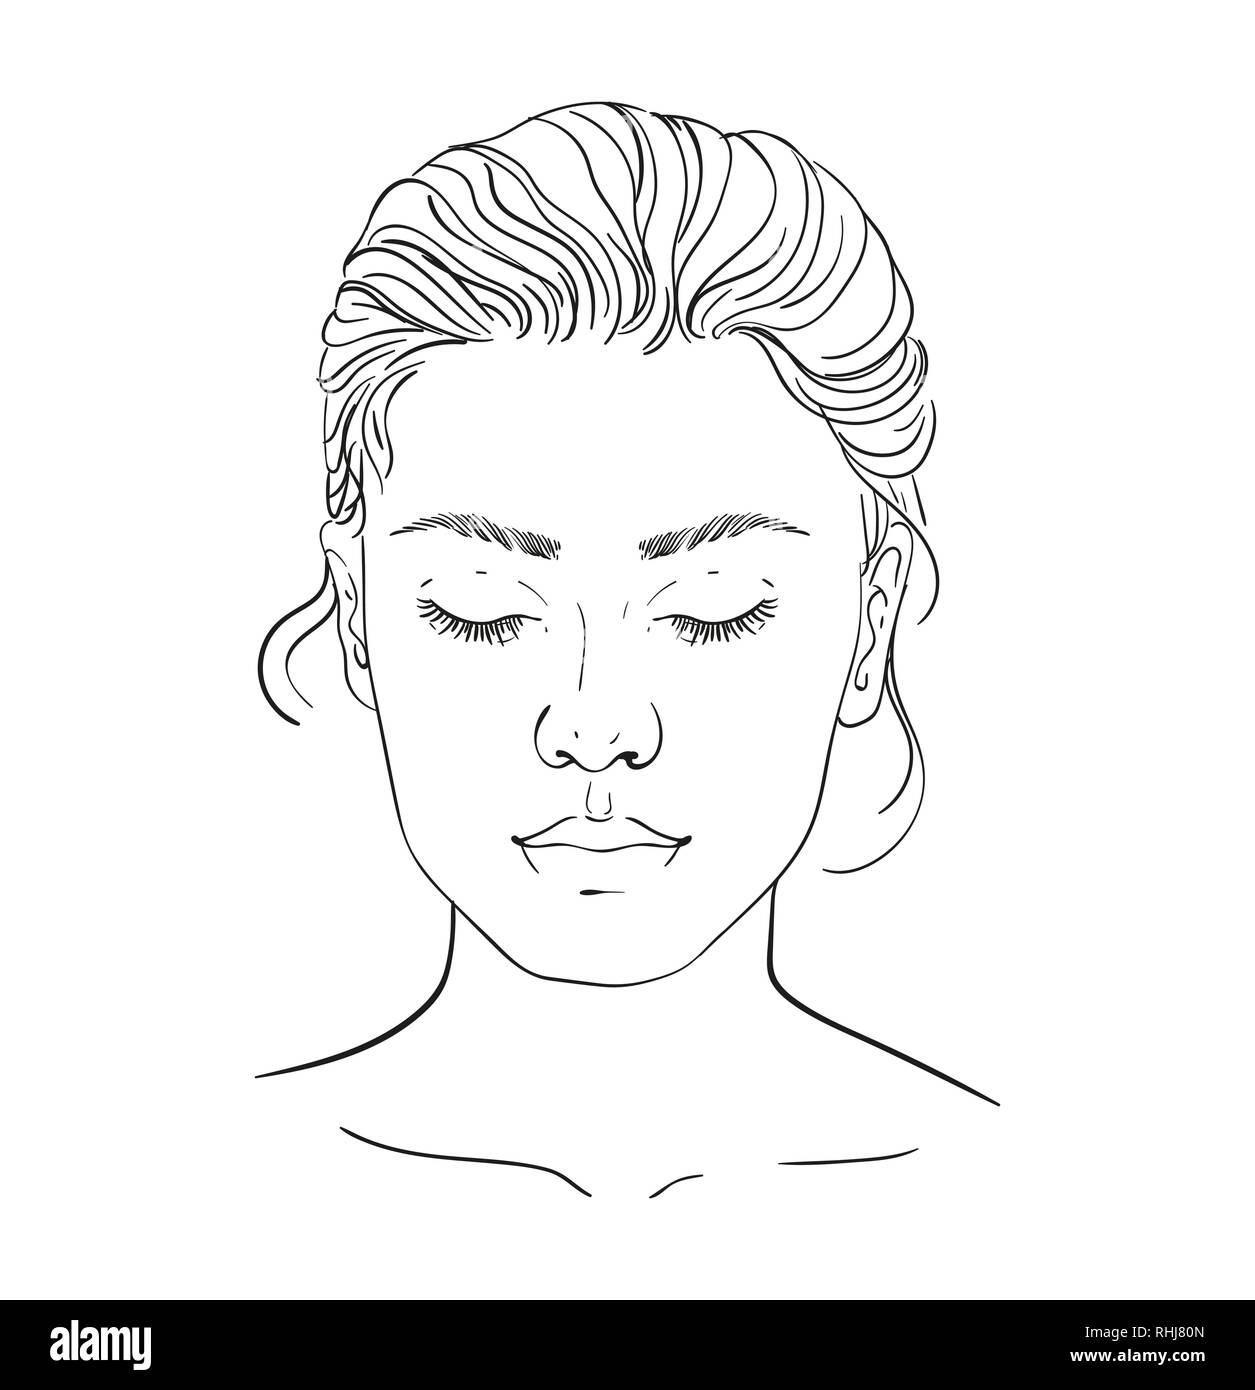 chart Makeup Artist Blank. Template. Vector illustration. illustration on a white background outline of the human female face for makeup. Stock Vector